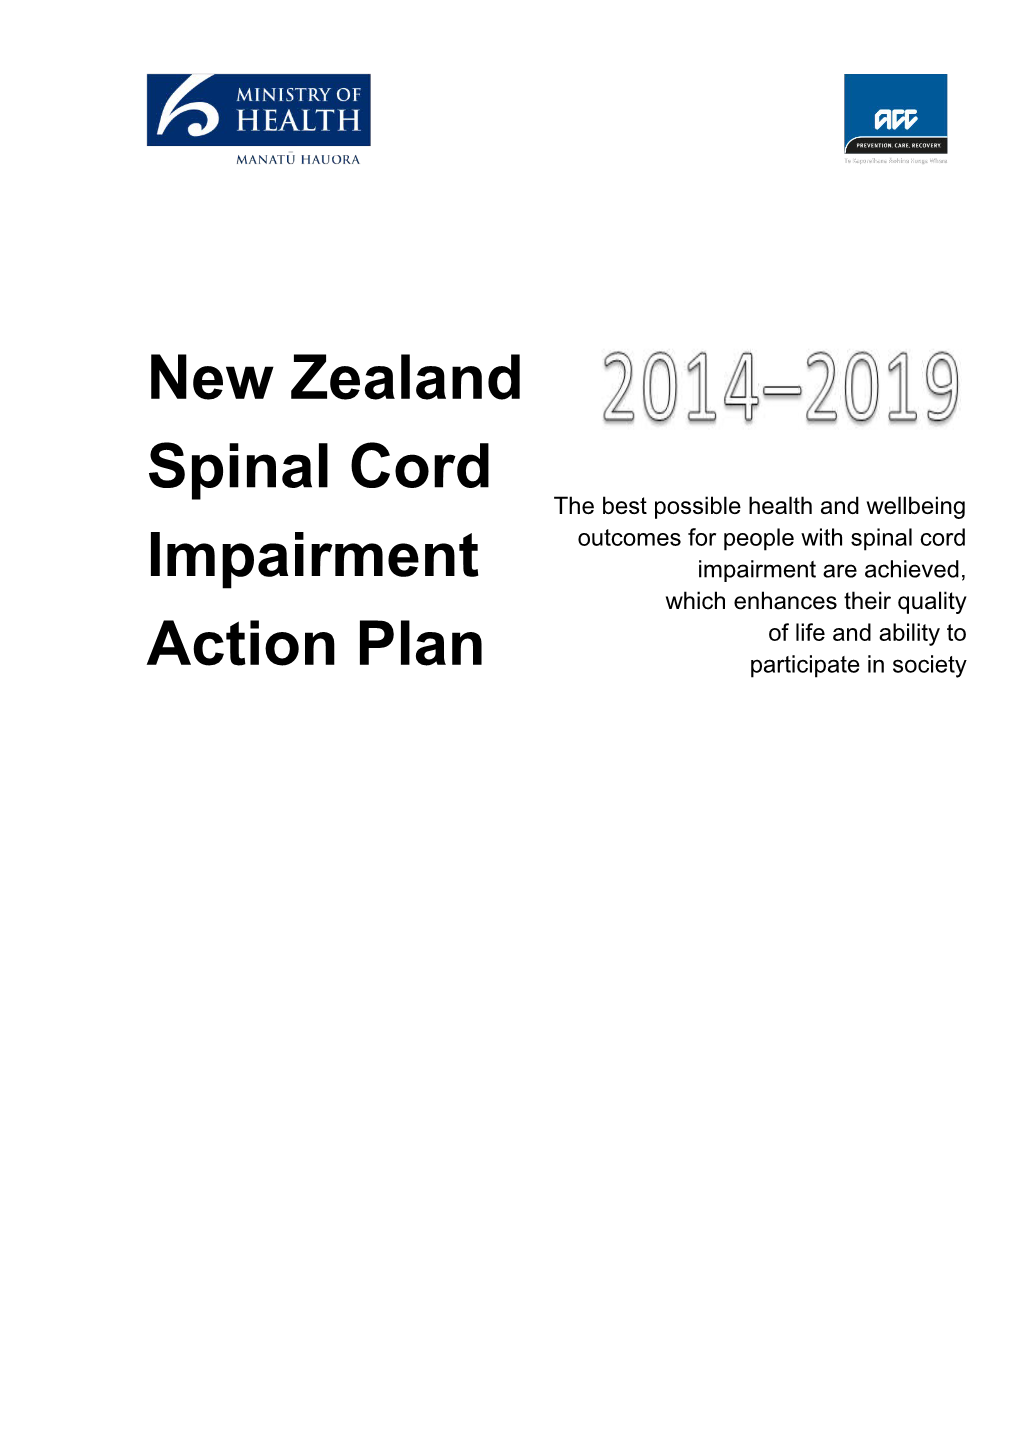 New Zealand Spinal Cord Impairment Action Plan